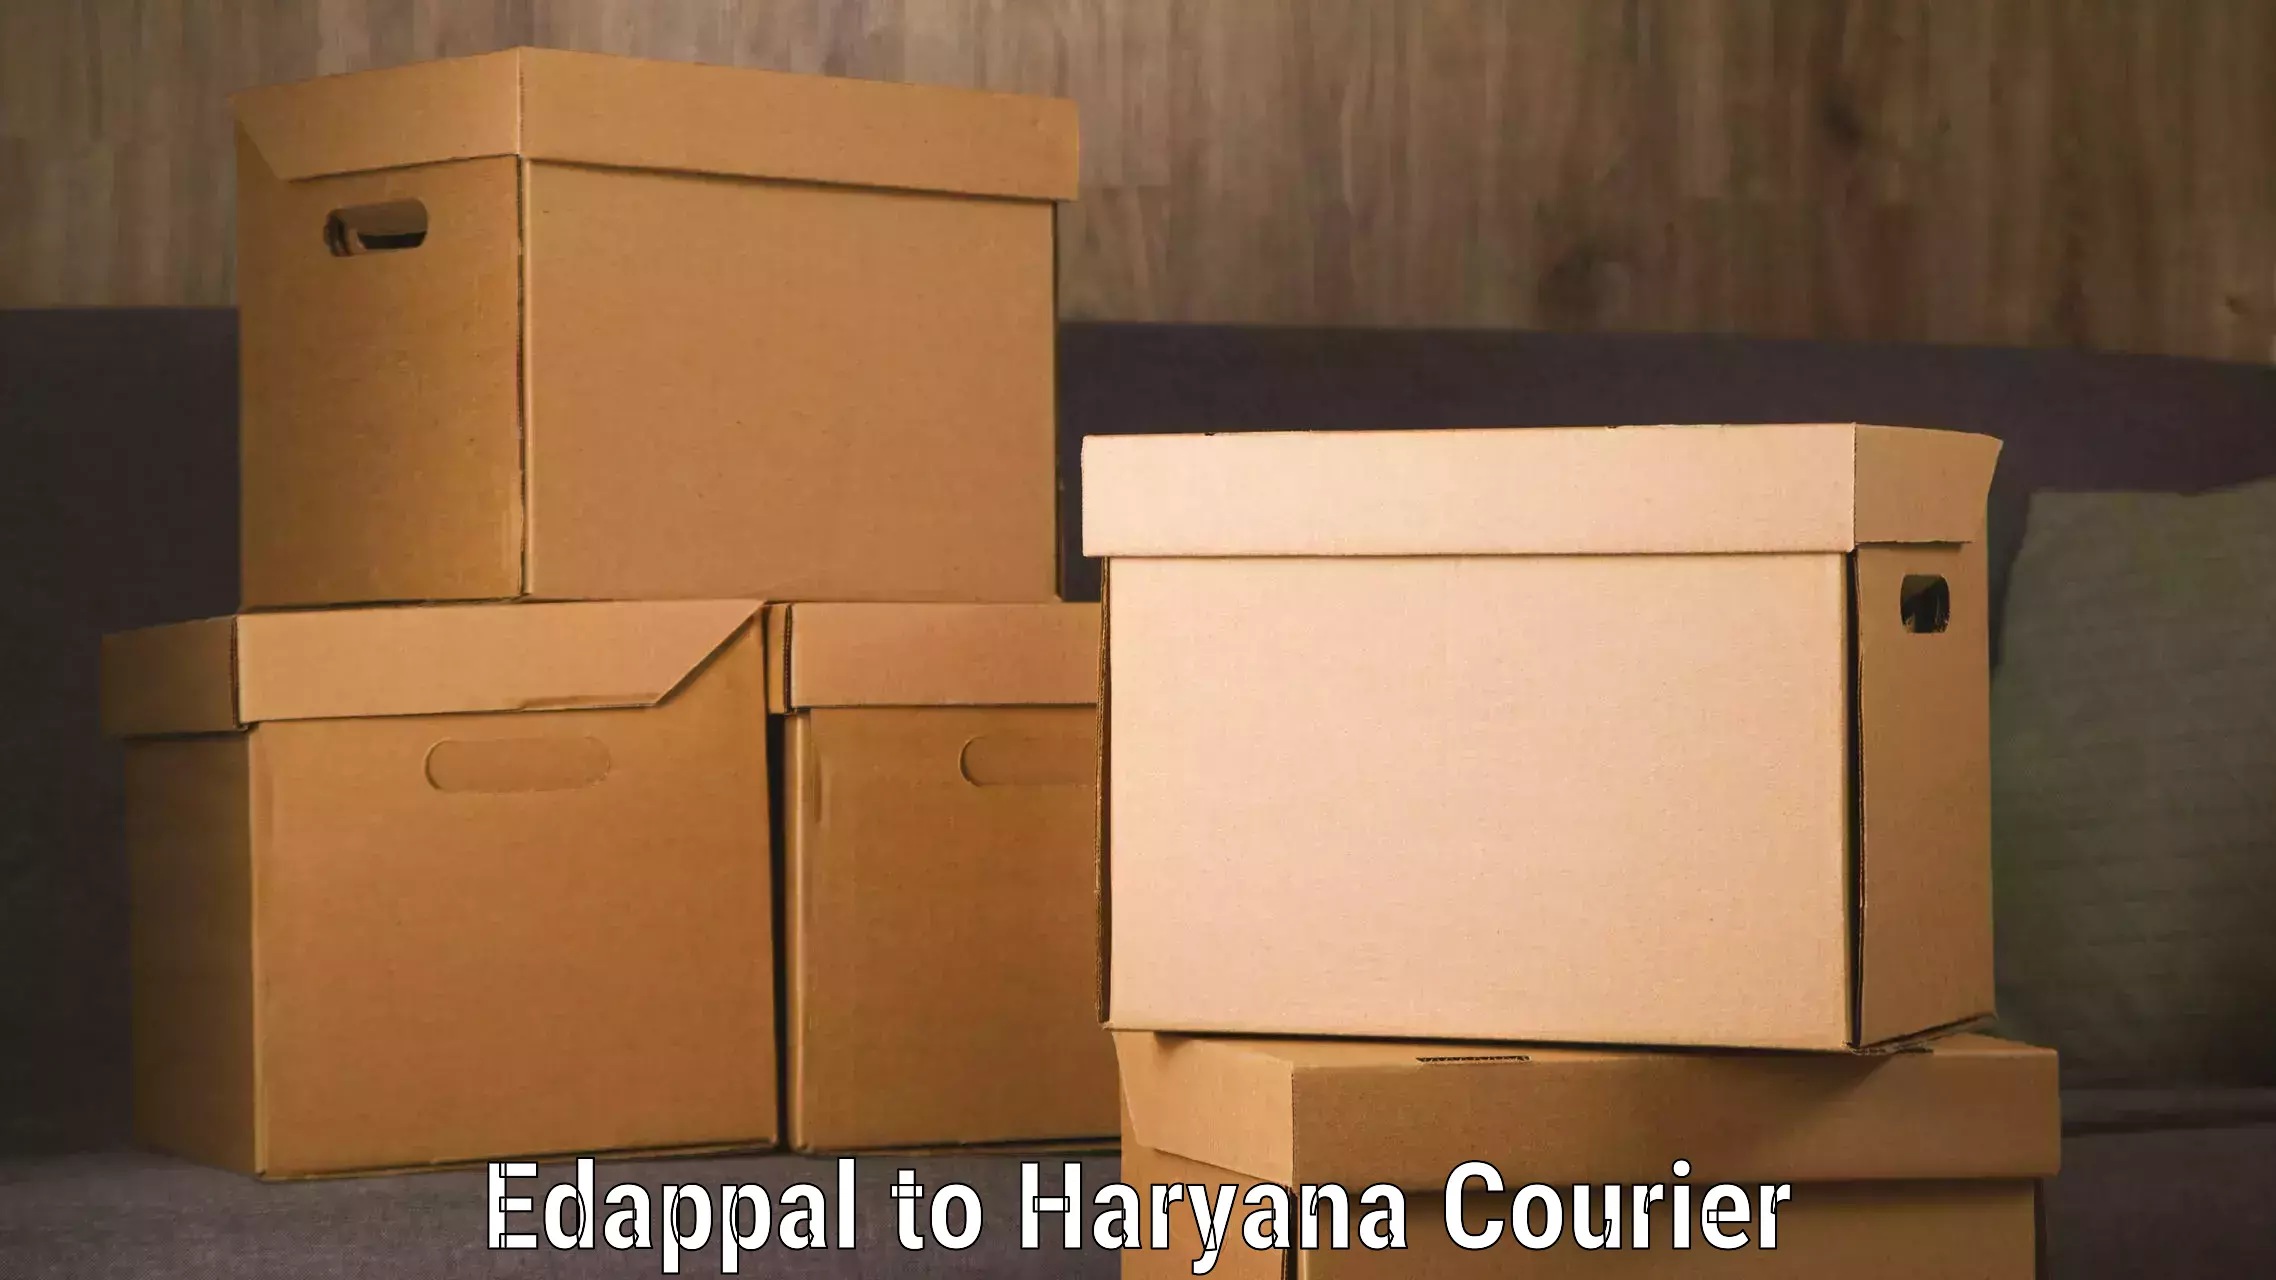 Efficient order fulfillment in Edappal to Haryana